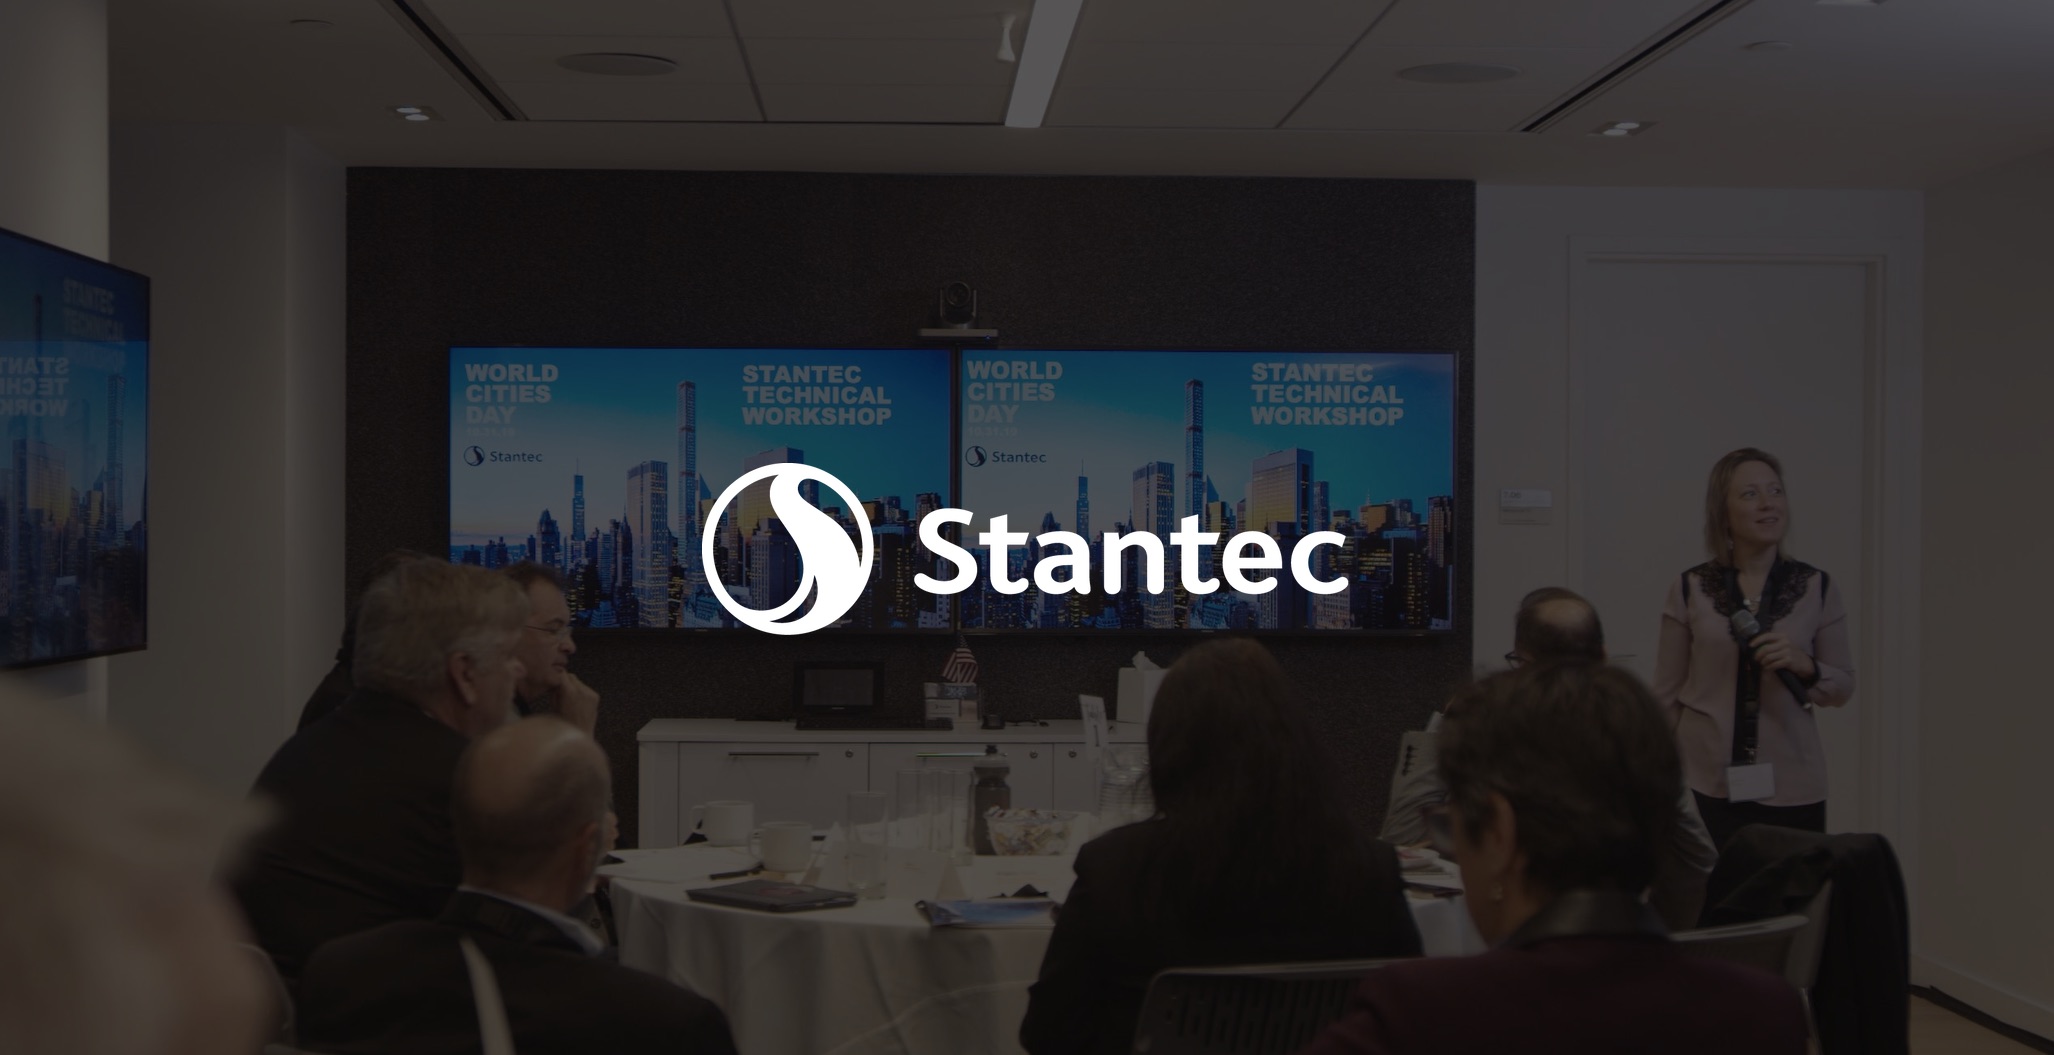 White Stantec logo over dimmed background of Live Video Streaming Event with many people in a room with video conferencing displays